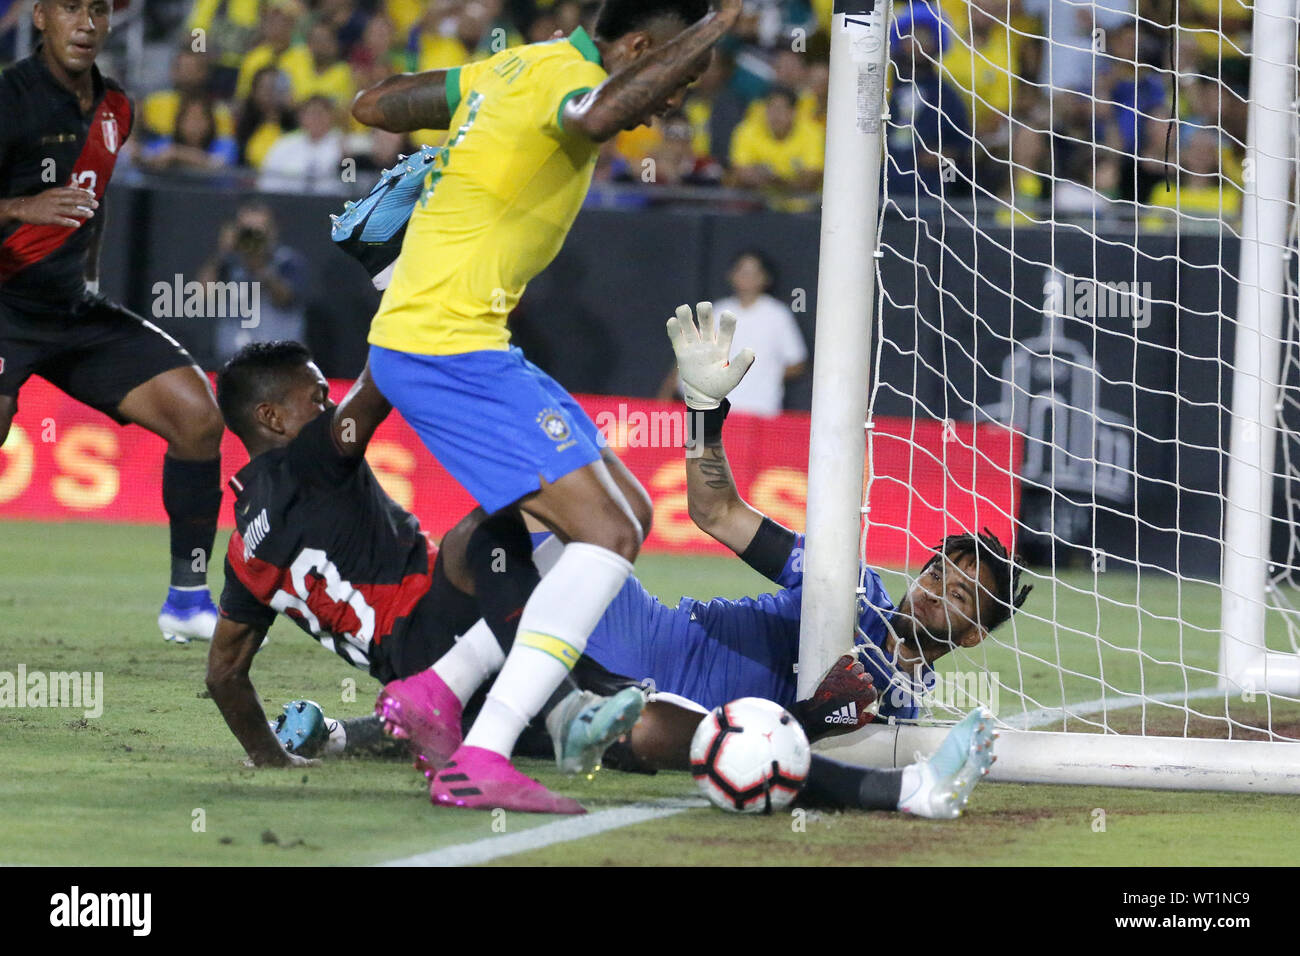 September 10, 2019, Los Angeles, California, U.S: Peru goalkeeper Pedro Gallese (1) and Peru midfielder Pedro Aquino (23) make save against Brazil defender Eder Militao (3) during an International Friendly Soccer match between Brazil and Peru at the Los Angeles Memorial Coliseum in Los Angeles on Tuesday, September 10, 2019. (Credit Image: © Ringo Chiu/ZUMA Wire) Stock Photo